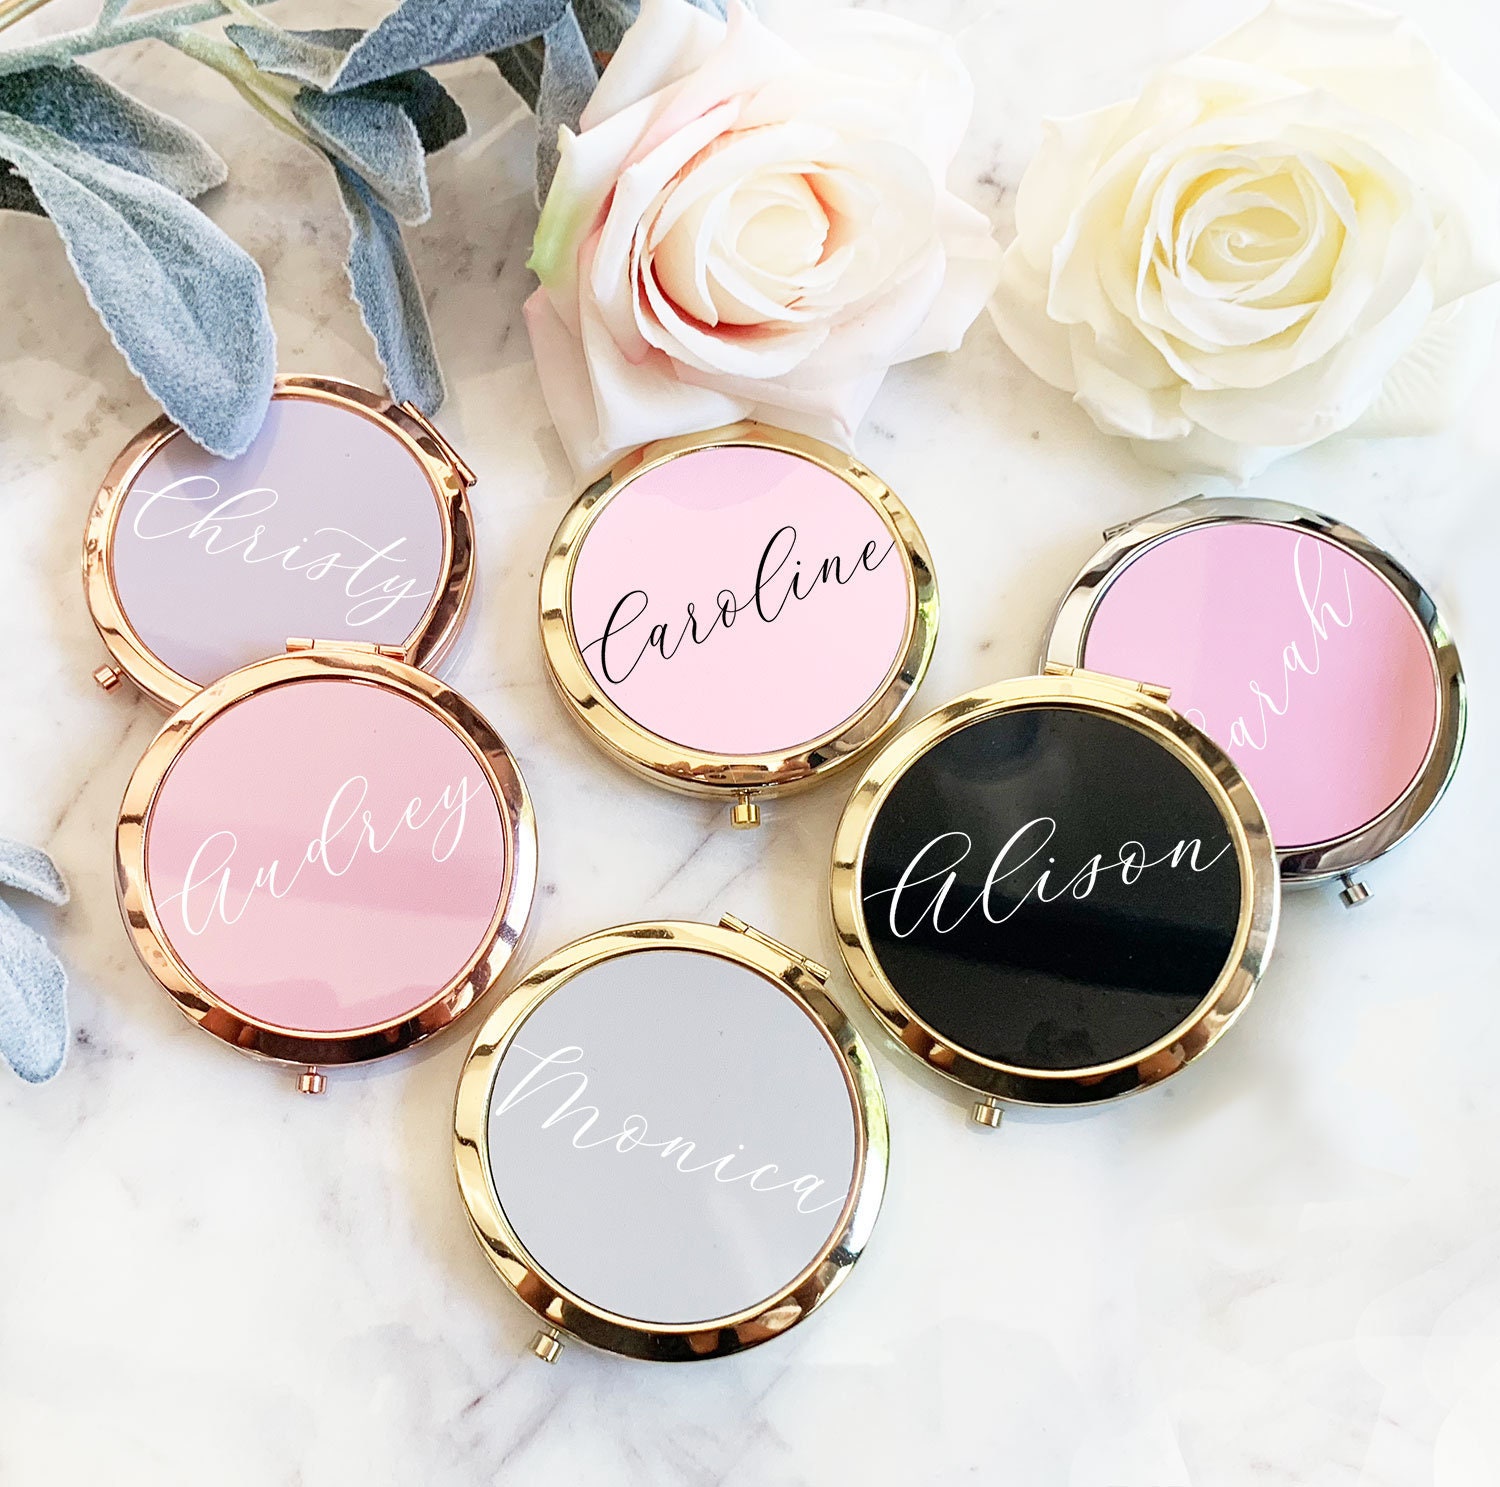 75 Shoe Design Mirror Compacts Wedding Bridal Shower Birthday Party Favors 